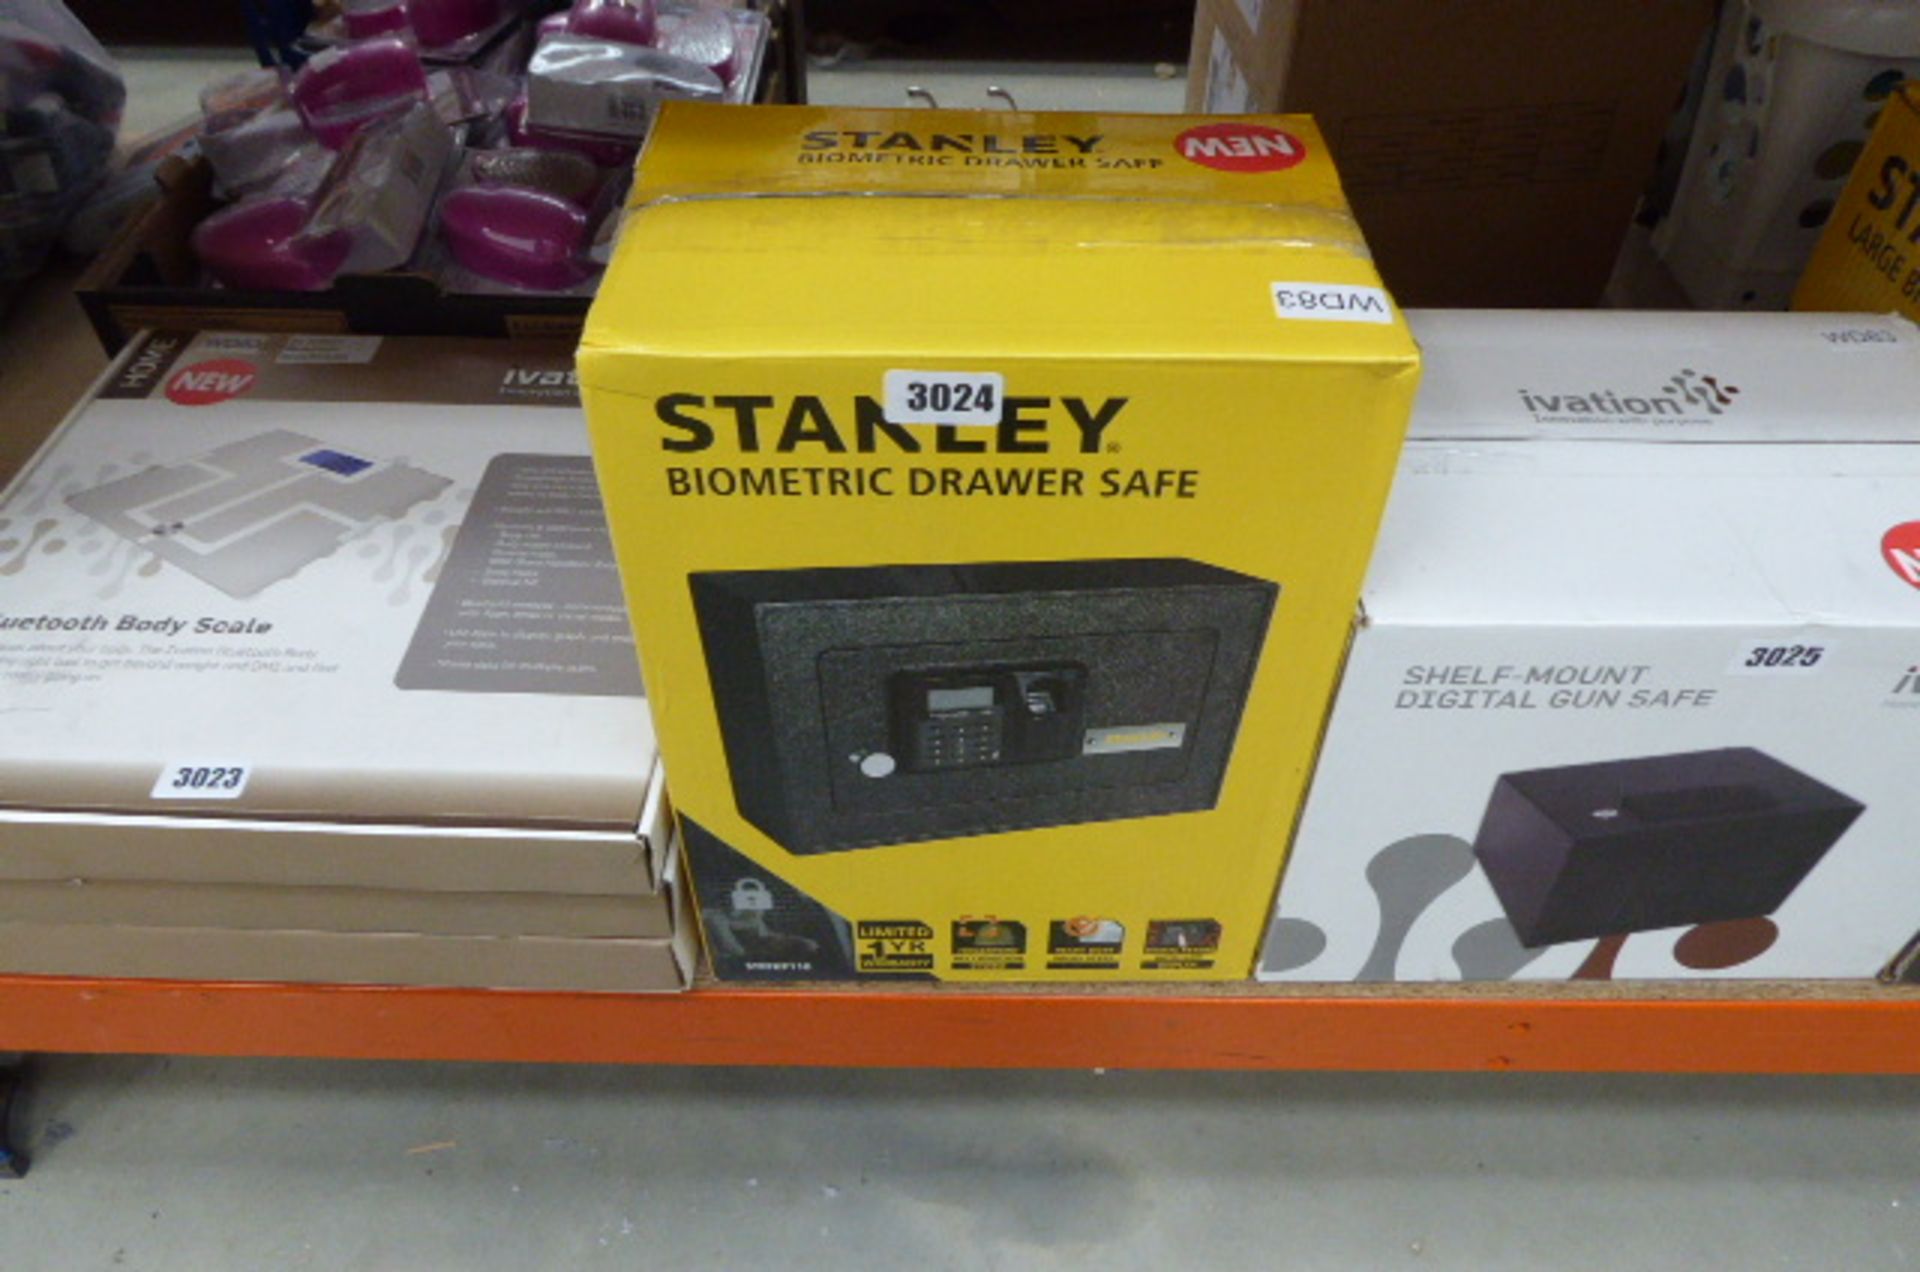 Boxed Stanley biometric drawer safe